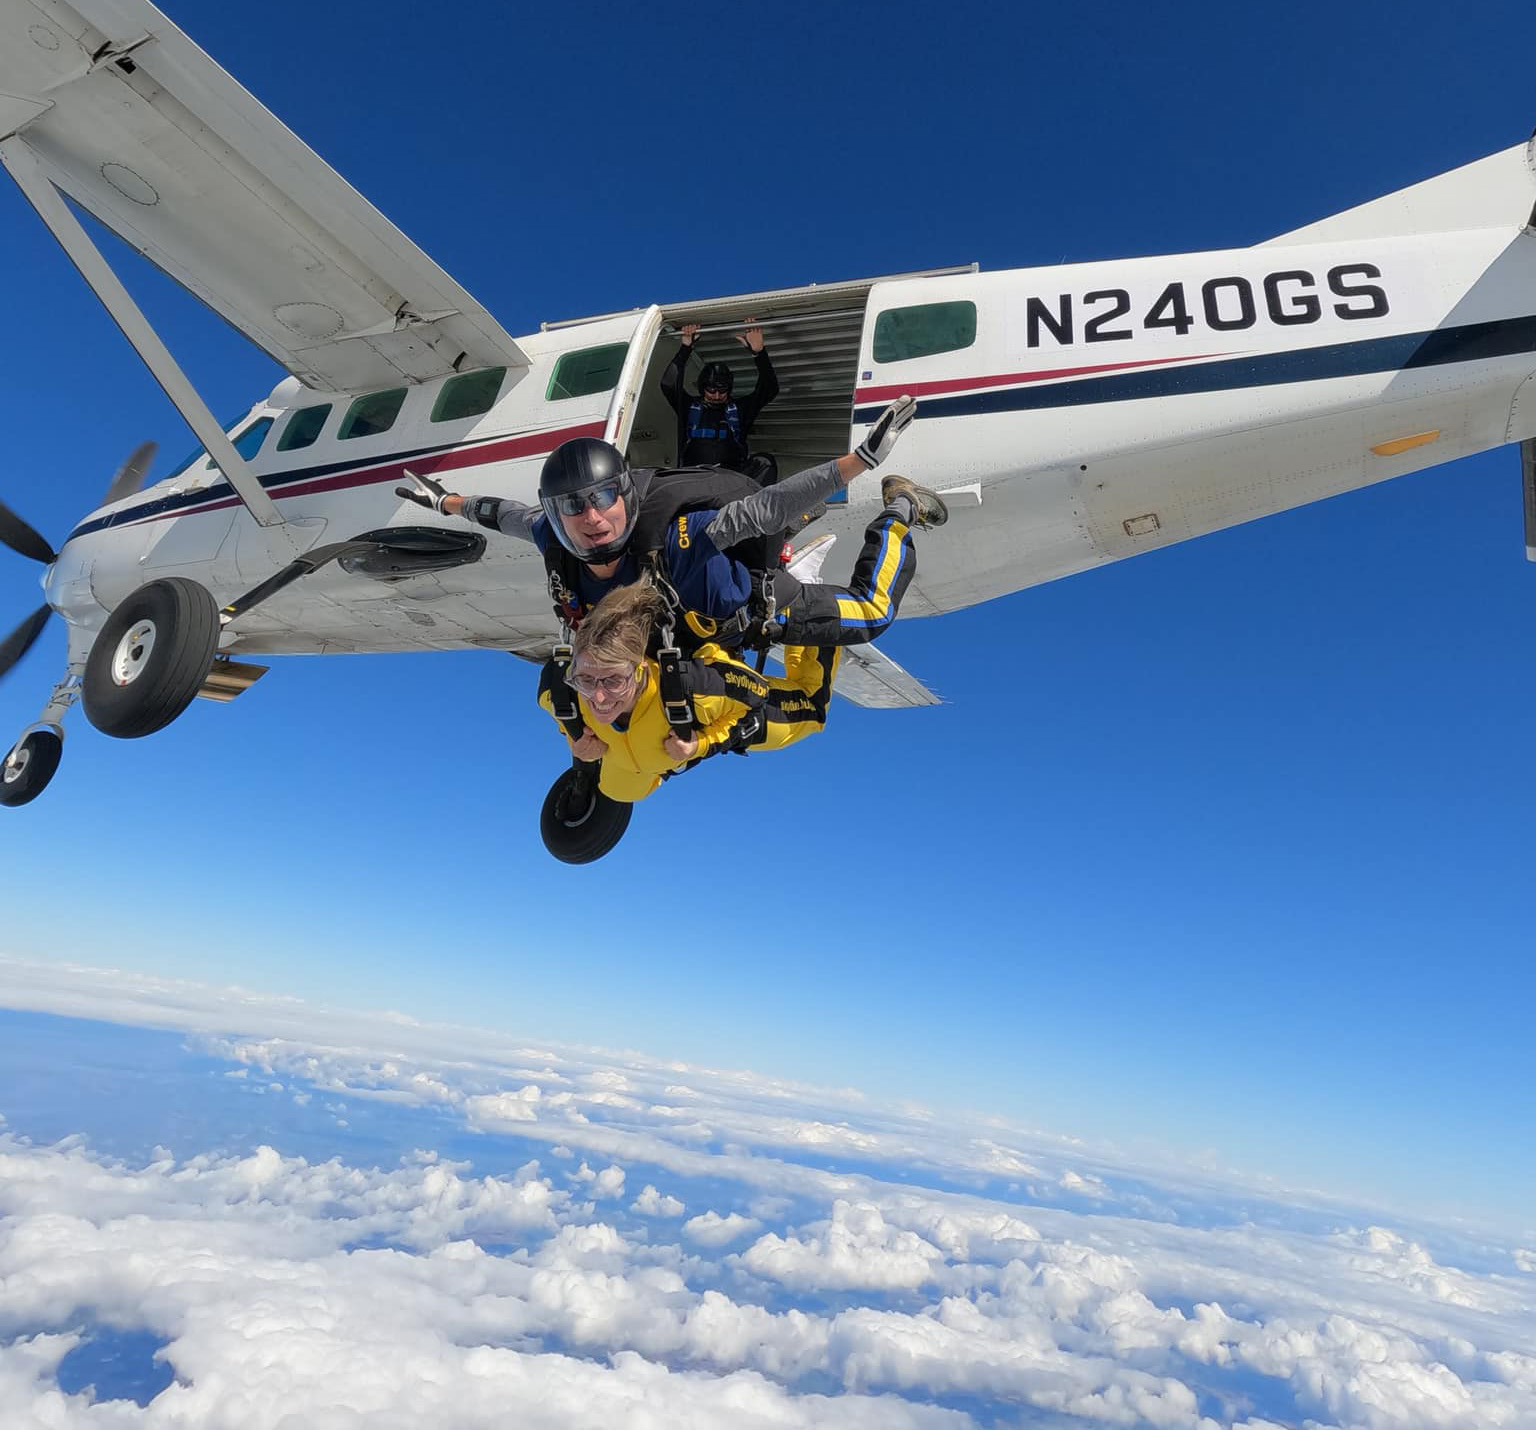 Hospiscare Heroes – From skydives to coffee mornings